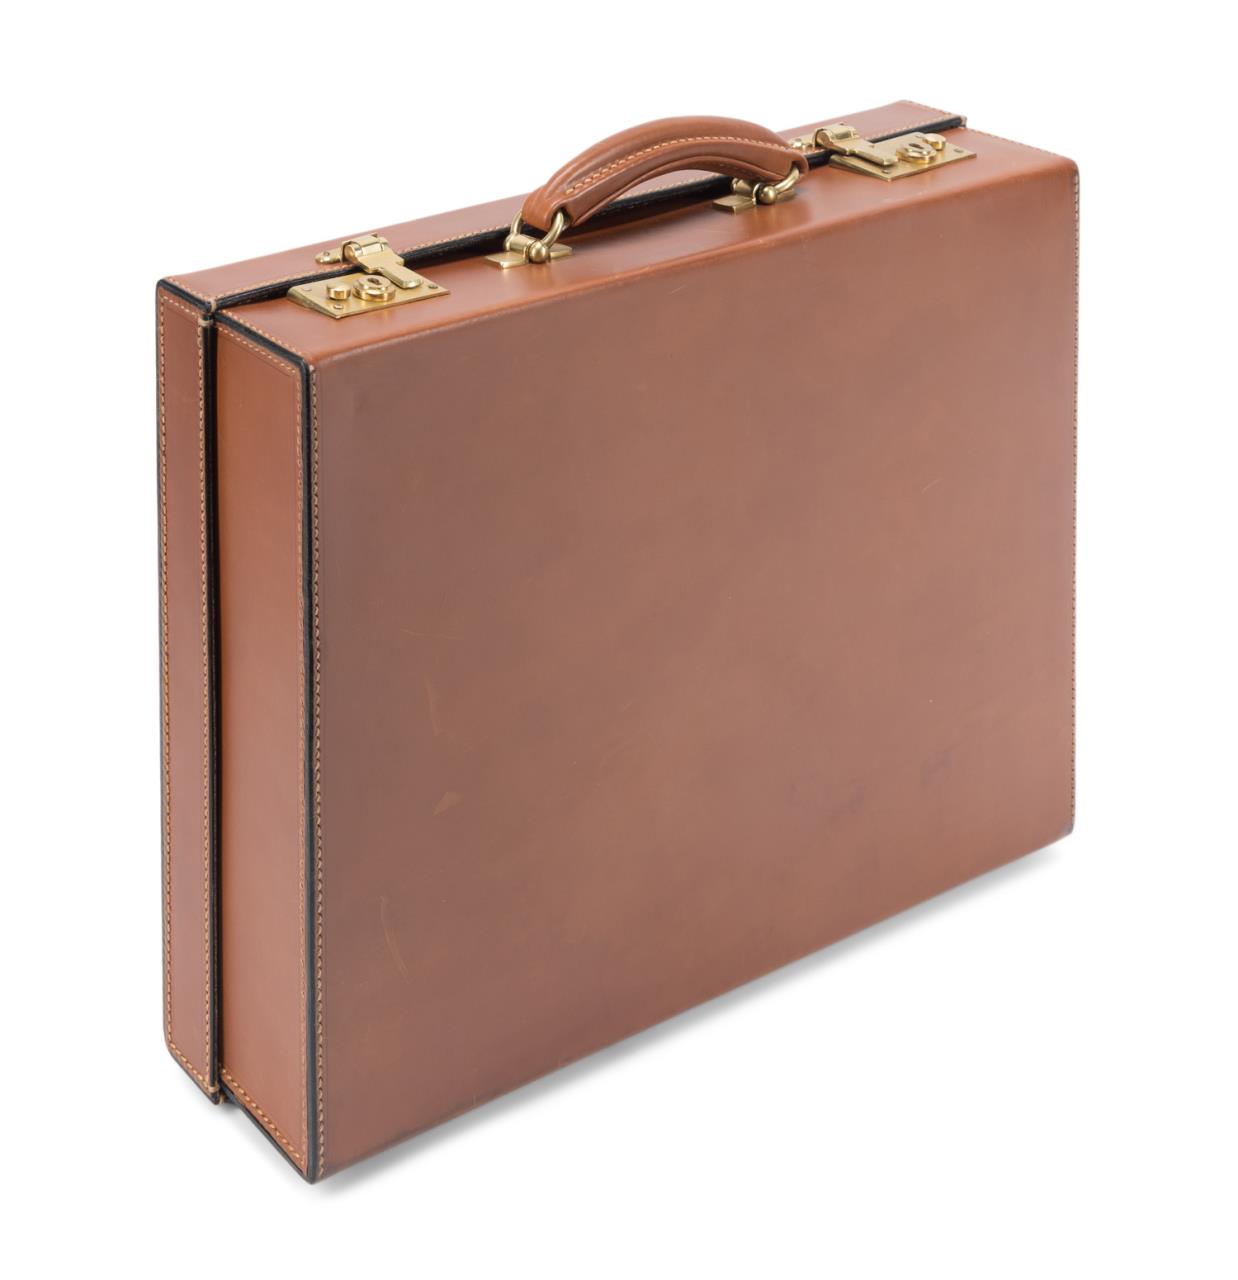 ALFRED DUNHILL COGNAC LEATHER HARDSIDE 2c006e